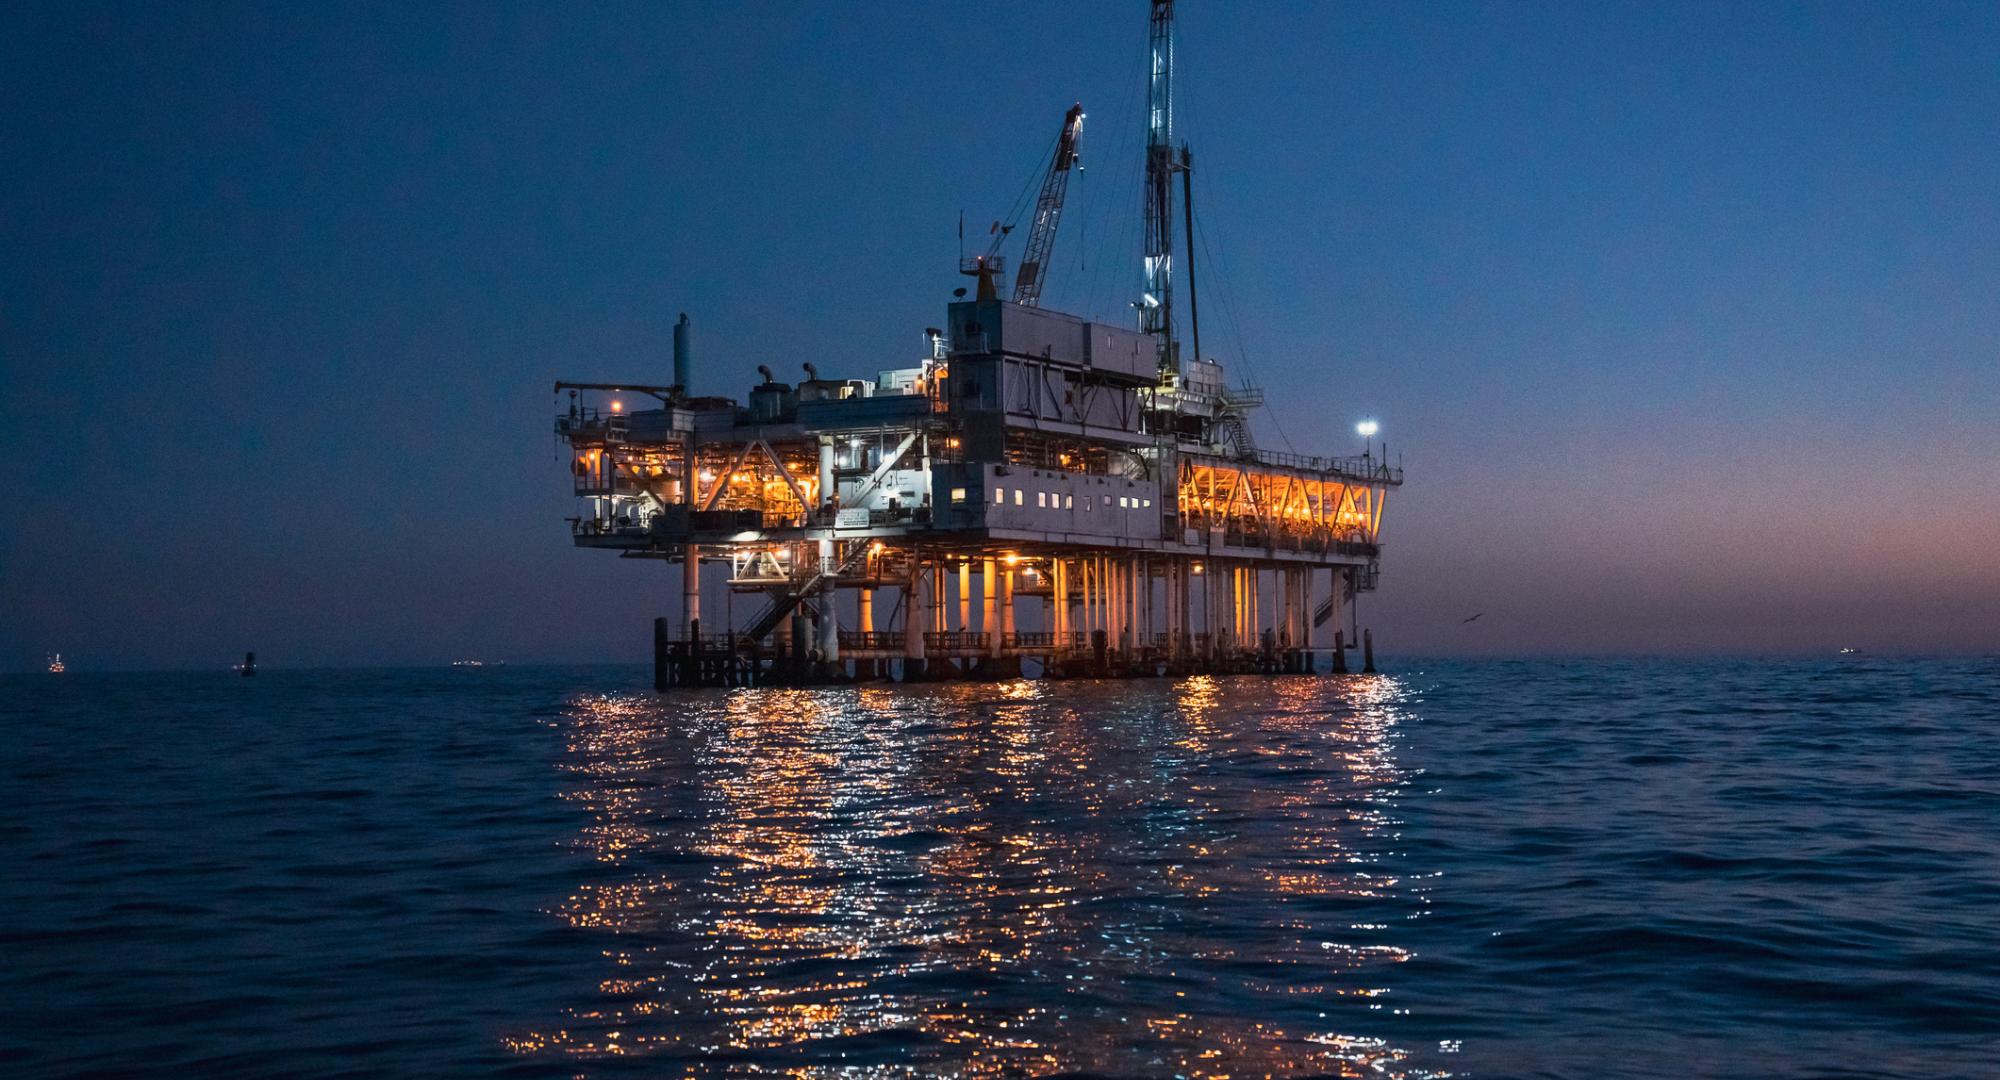 Night Time Offshore Oil Rig Drilling and Fracking Operation, Brightly Lit, on Calm Seas, Oil Platform